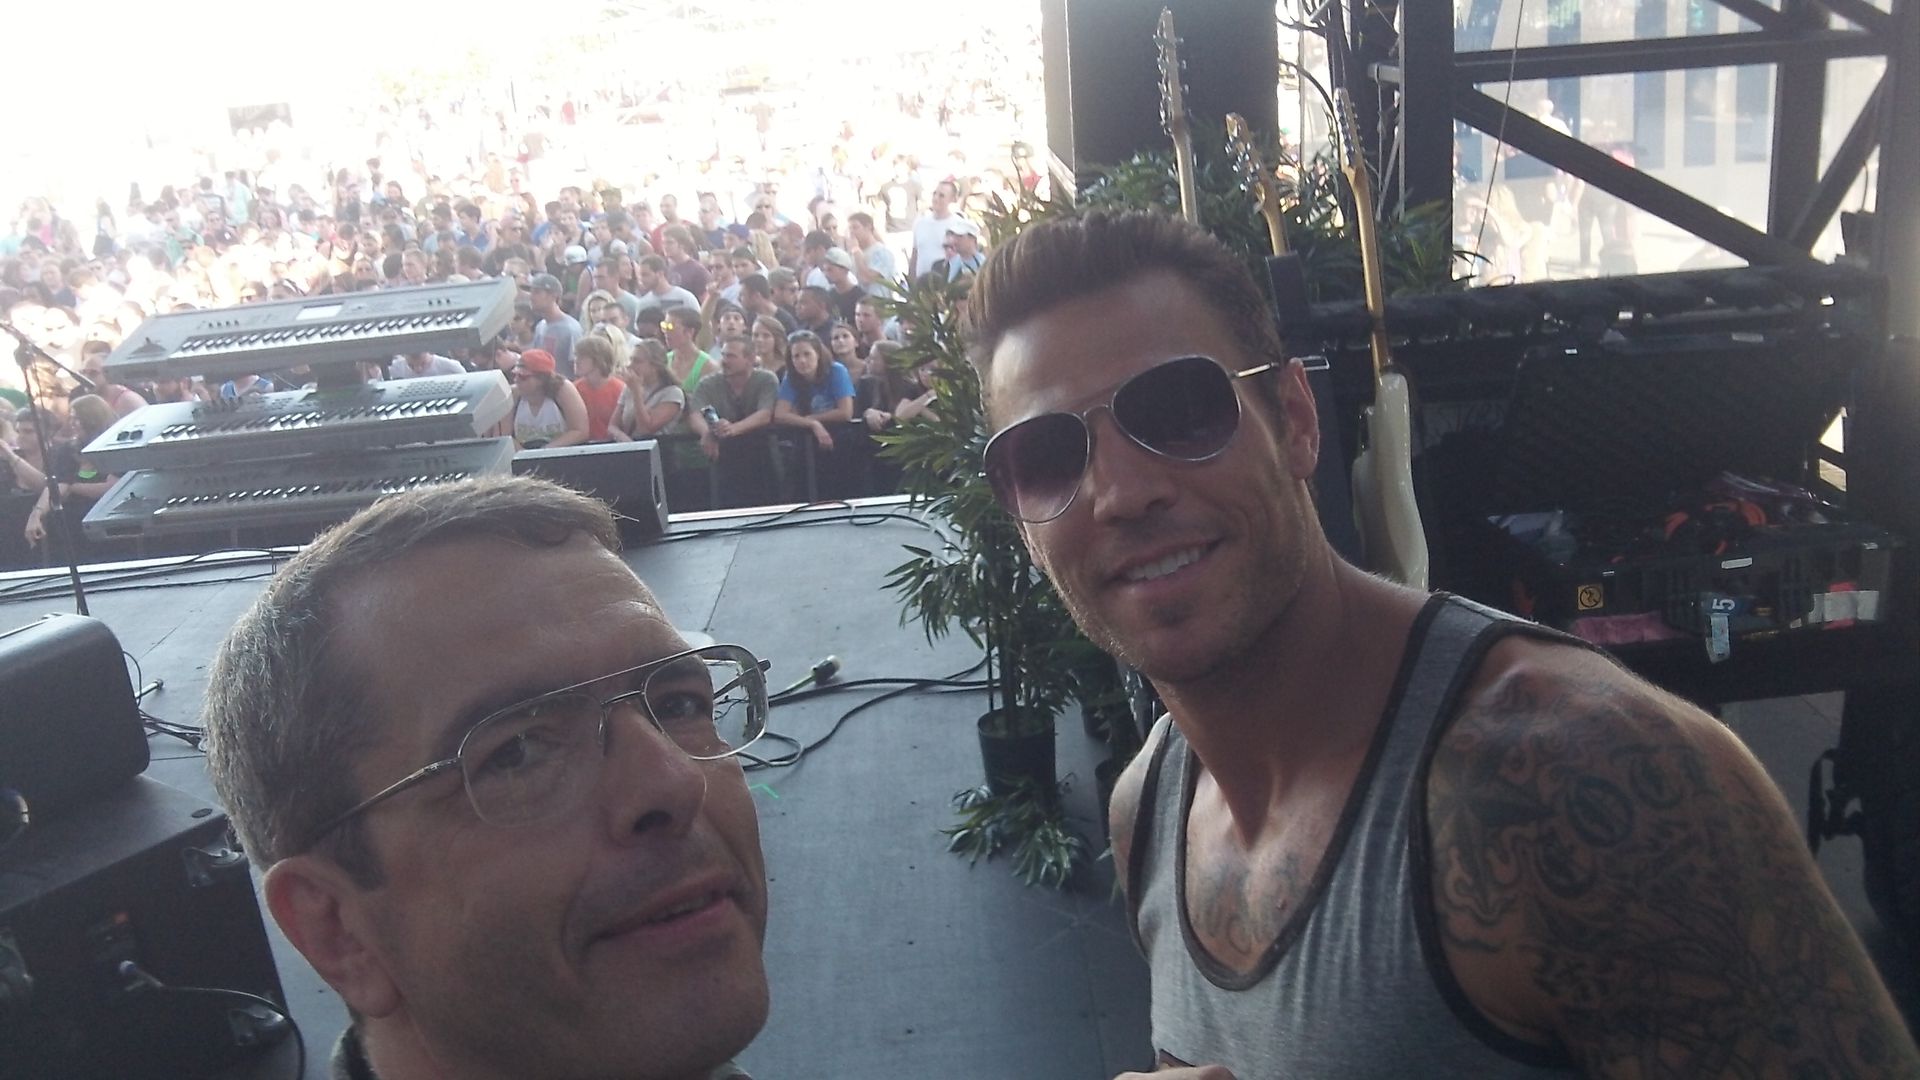 Shawn House on stage with hemp instigator Riles Cote with 1000 of people watching the stage